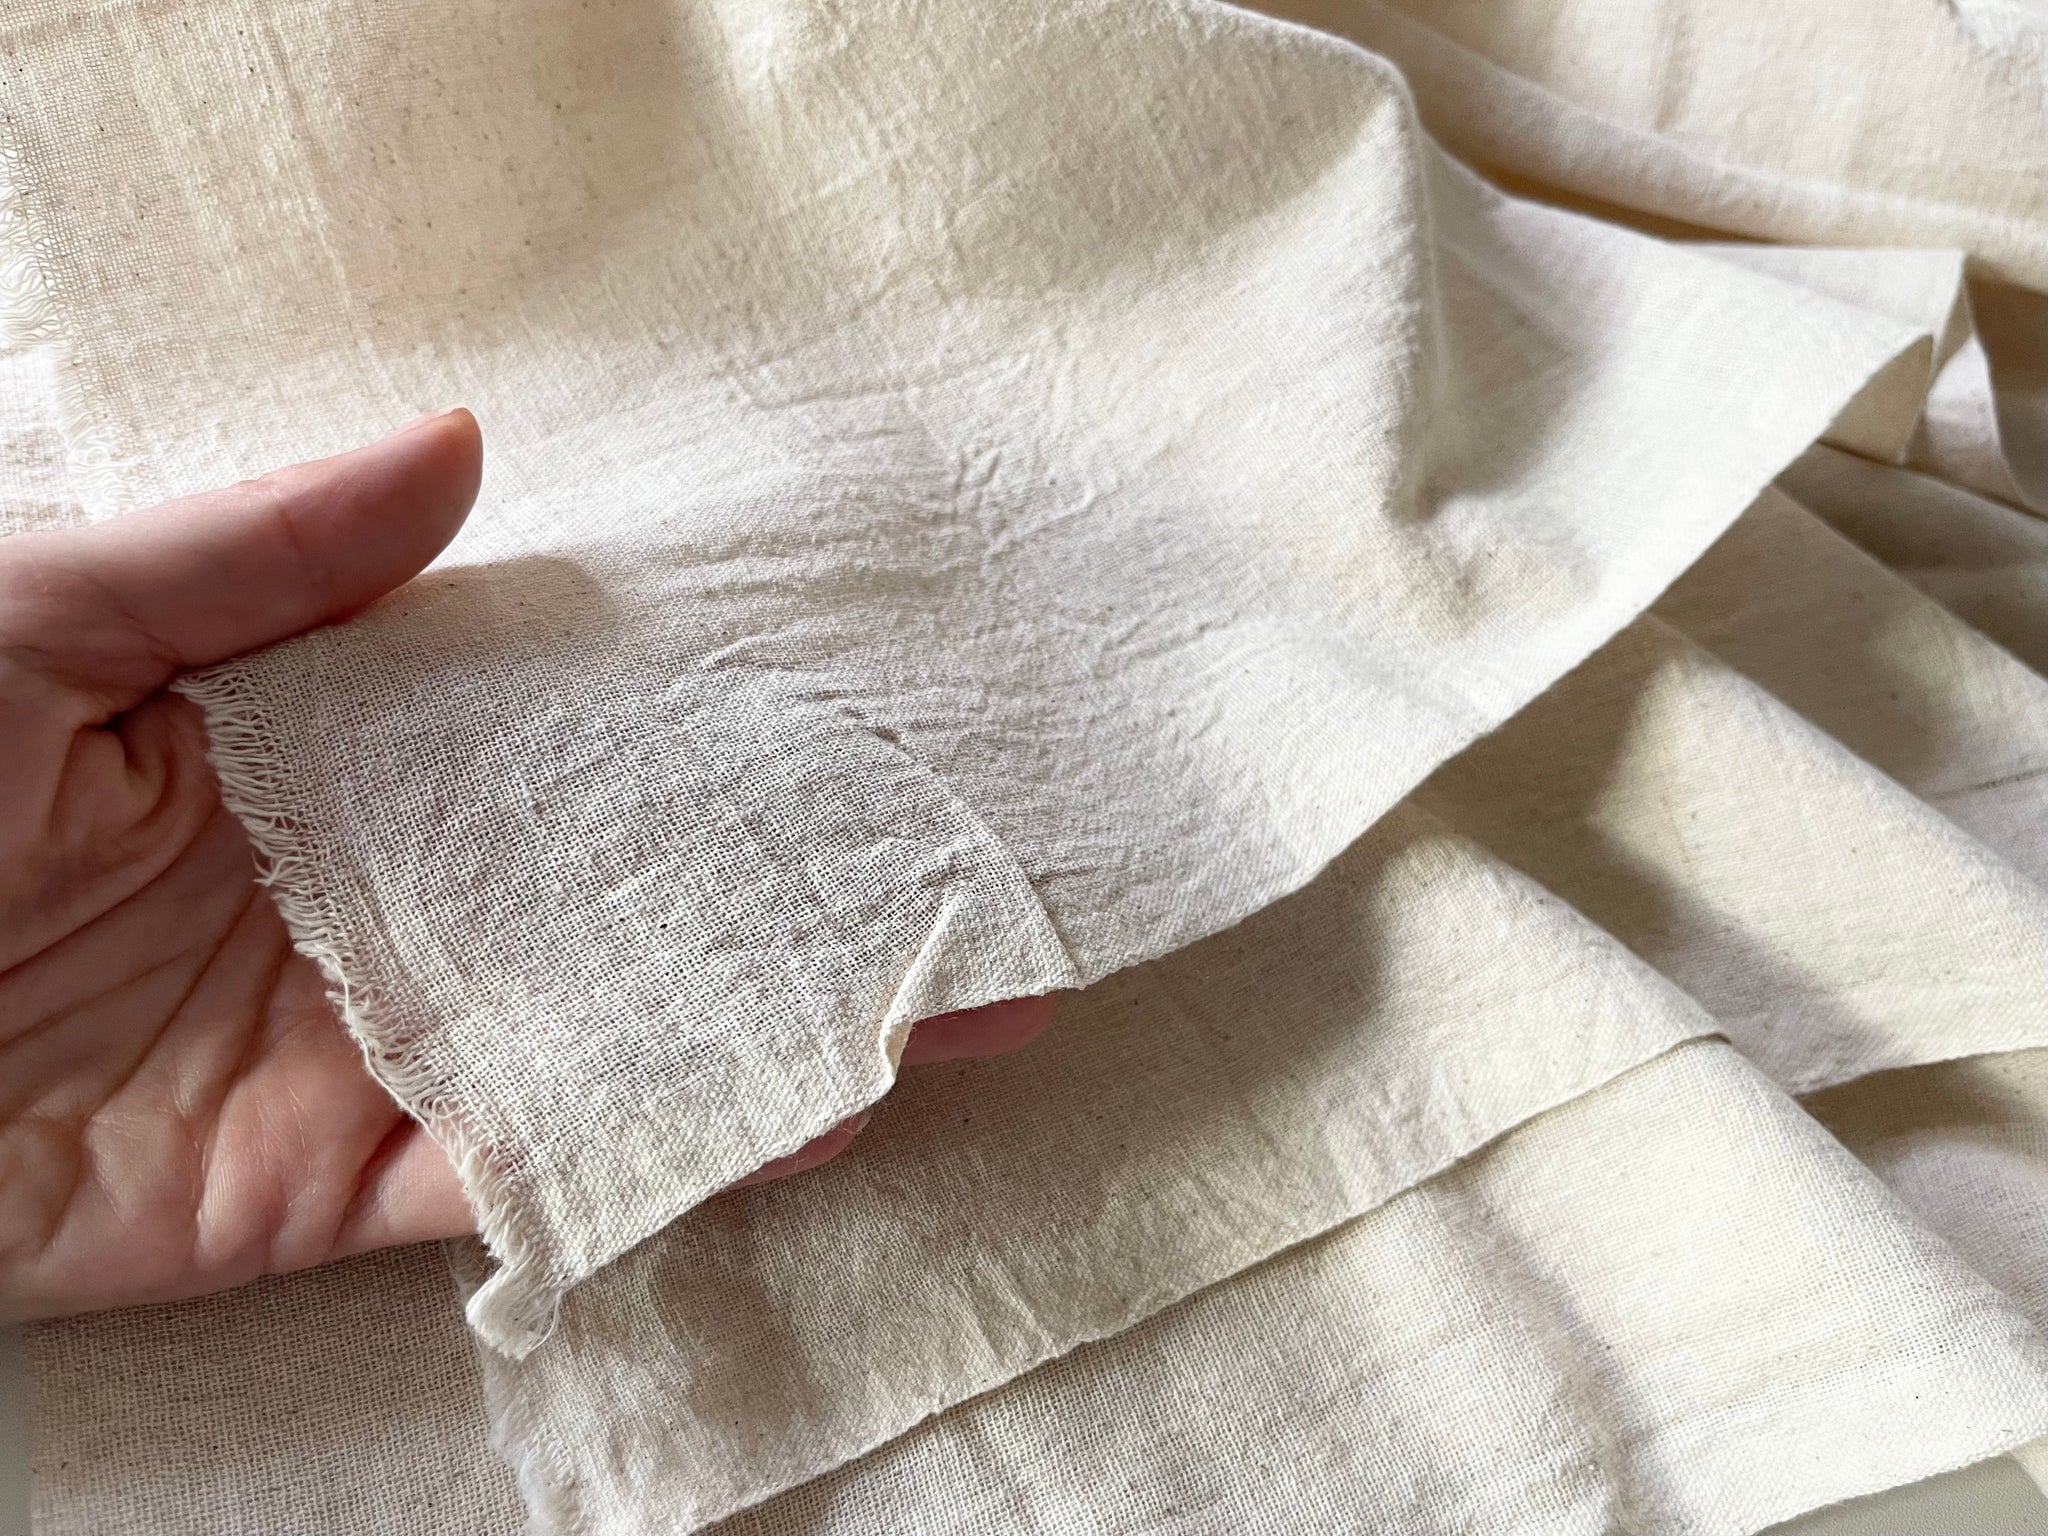 Handwoven Cotton Fabric - Natural Unbleached